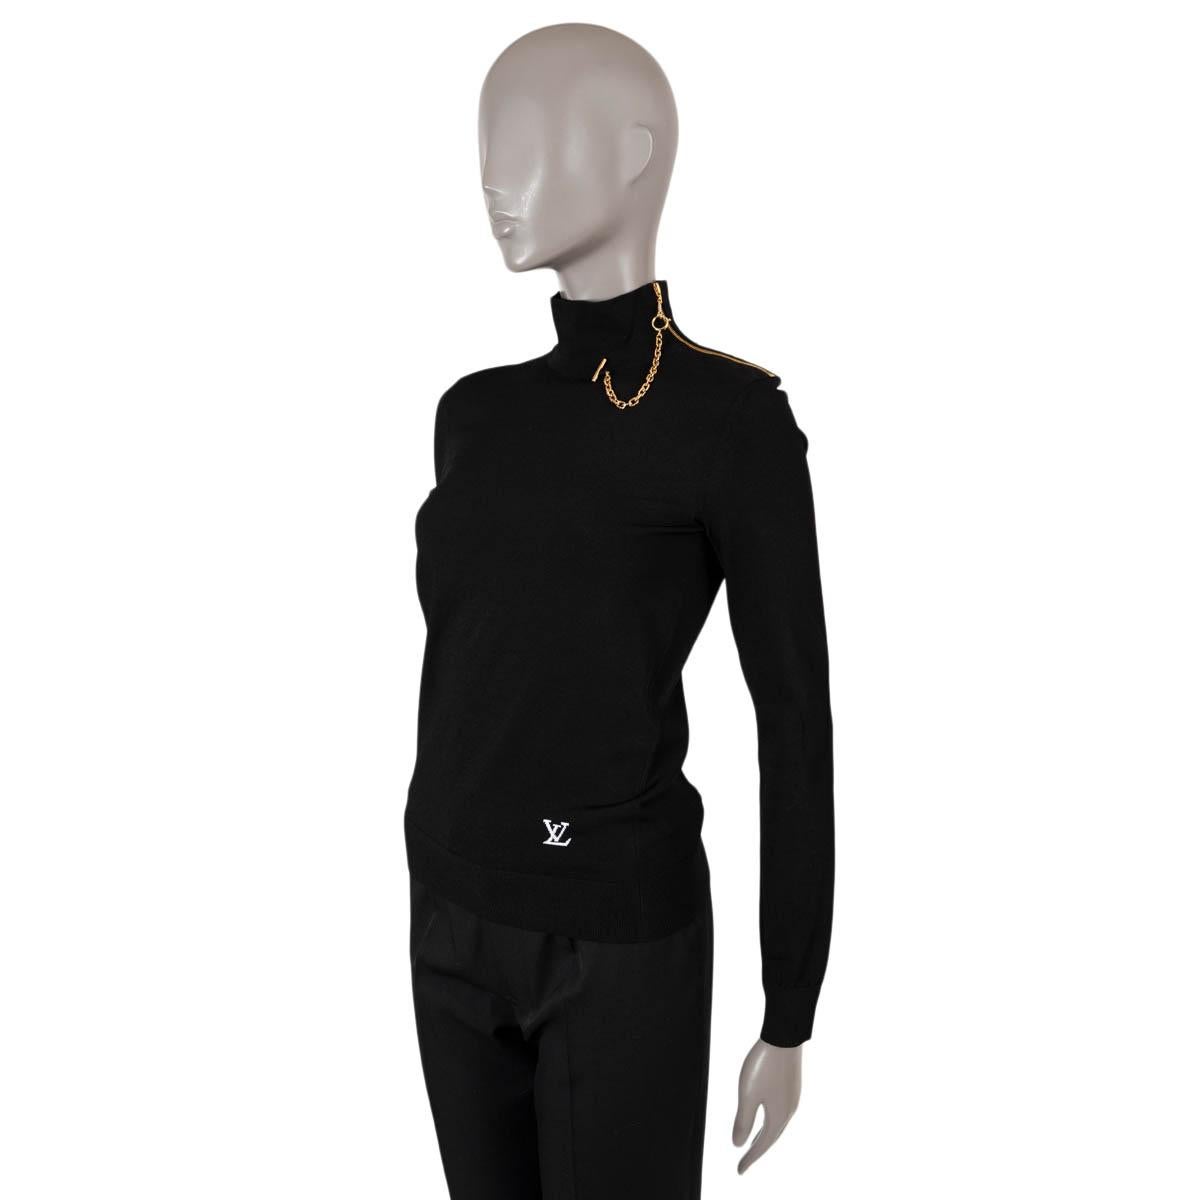 100% authentic Louis Vuitton turtleneck sweater in black silky stretch knit viscose (83%) and polyester (17%). Features an asymmetric exposed golden zipper pulled with a coordinating chain that drapes elegantly around the collar and white LV